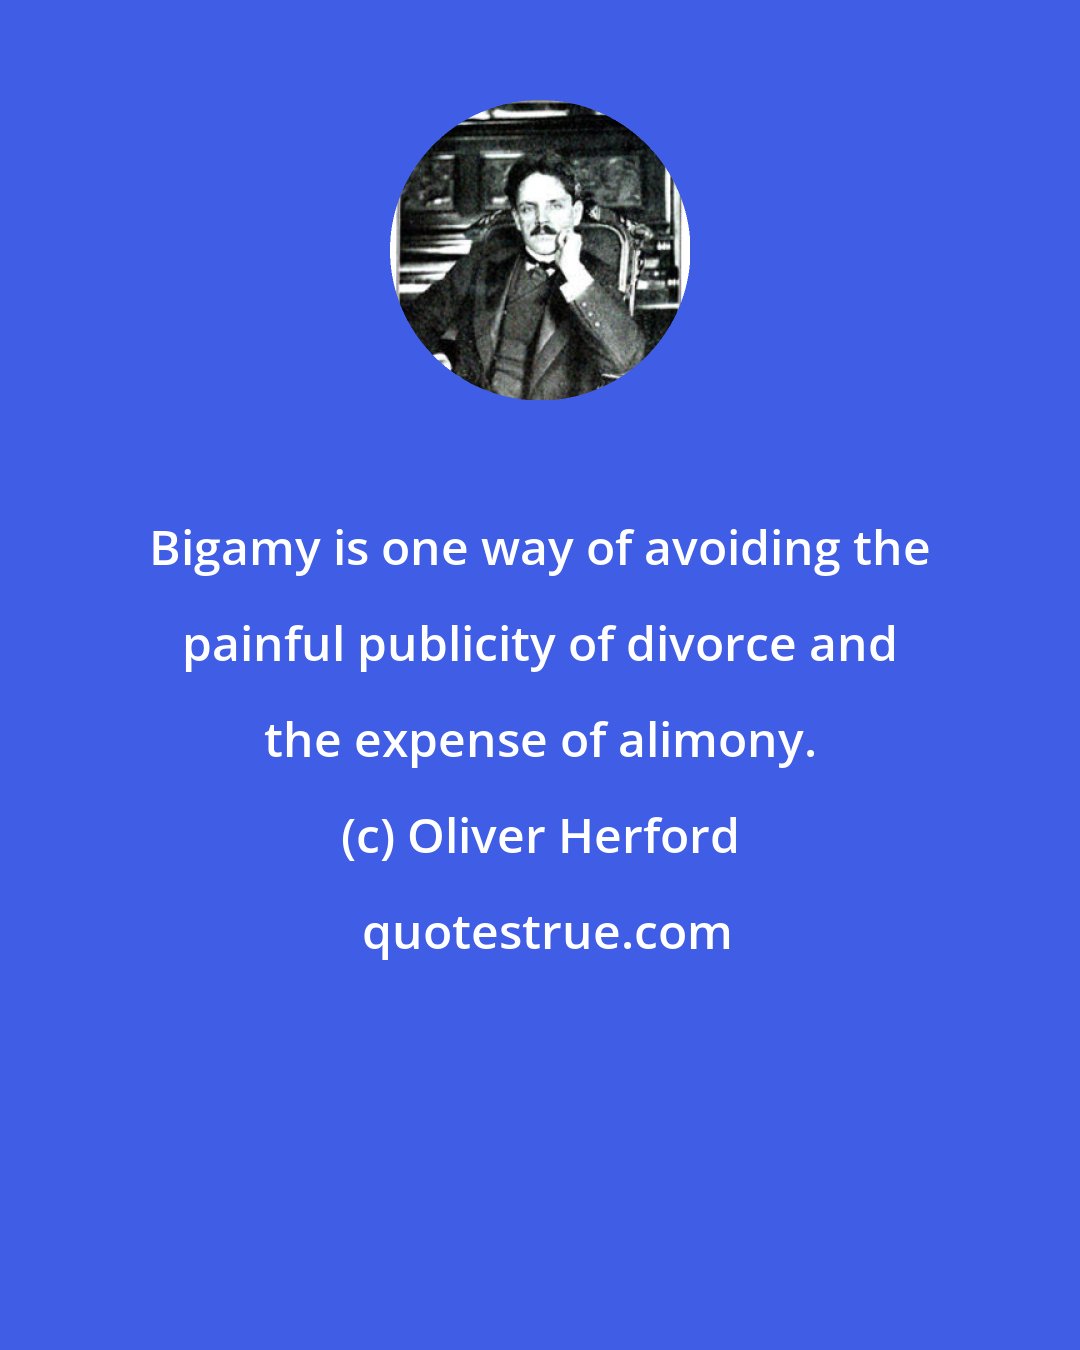 Oliver Herford: Bigamy is one way of avoiding the painful publicity of divorce and the expense of alimony.